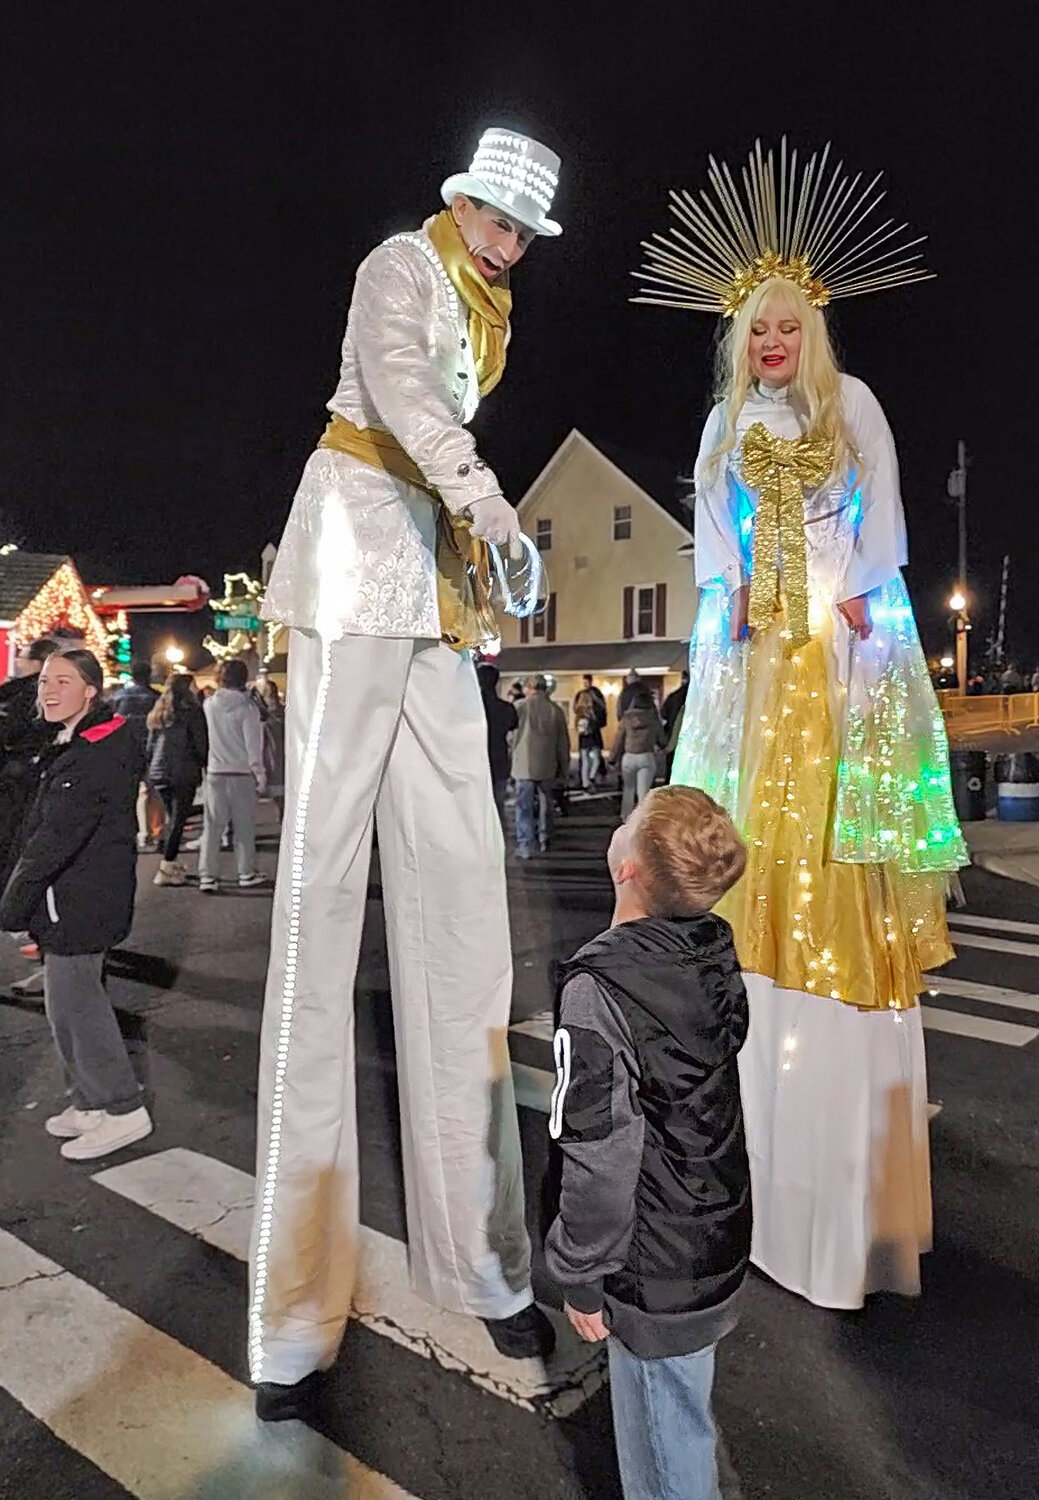 Andrew Scharff, a.k.a. Mister Legs, and Hannah Pinkos, of Skylark Circus Arts, gives a tree-lighting ceremony attendee two people to look up to.